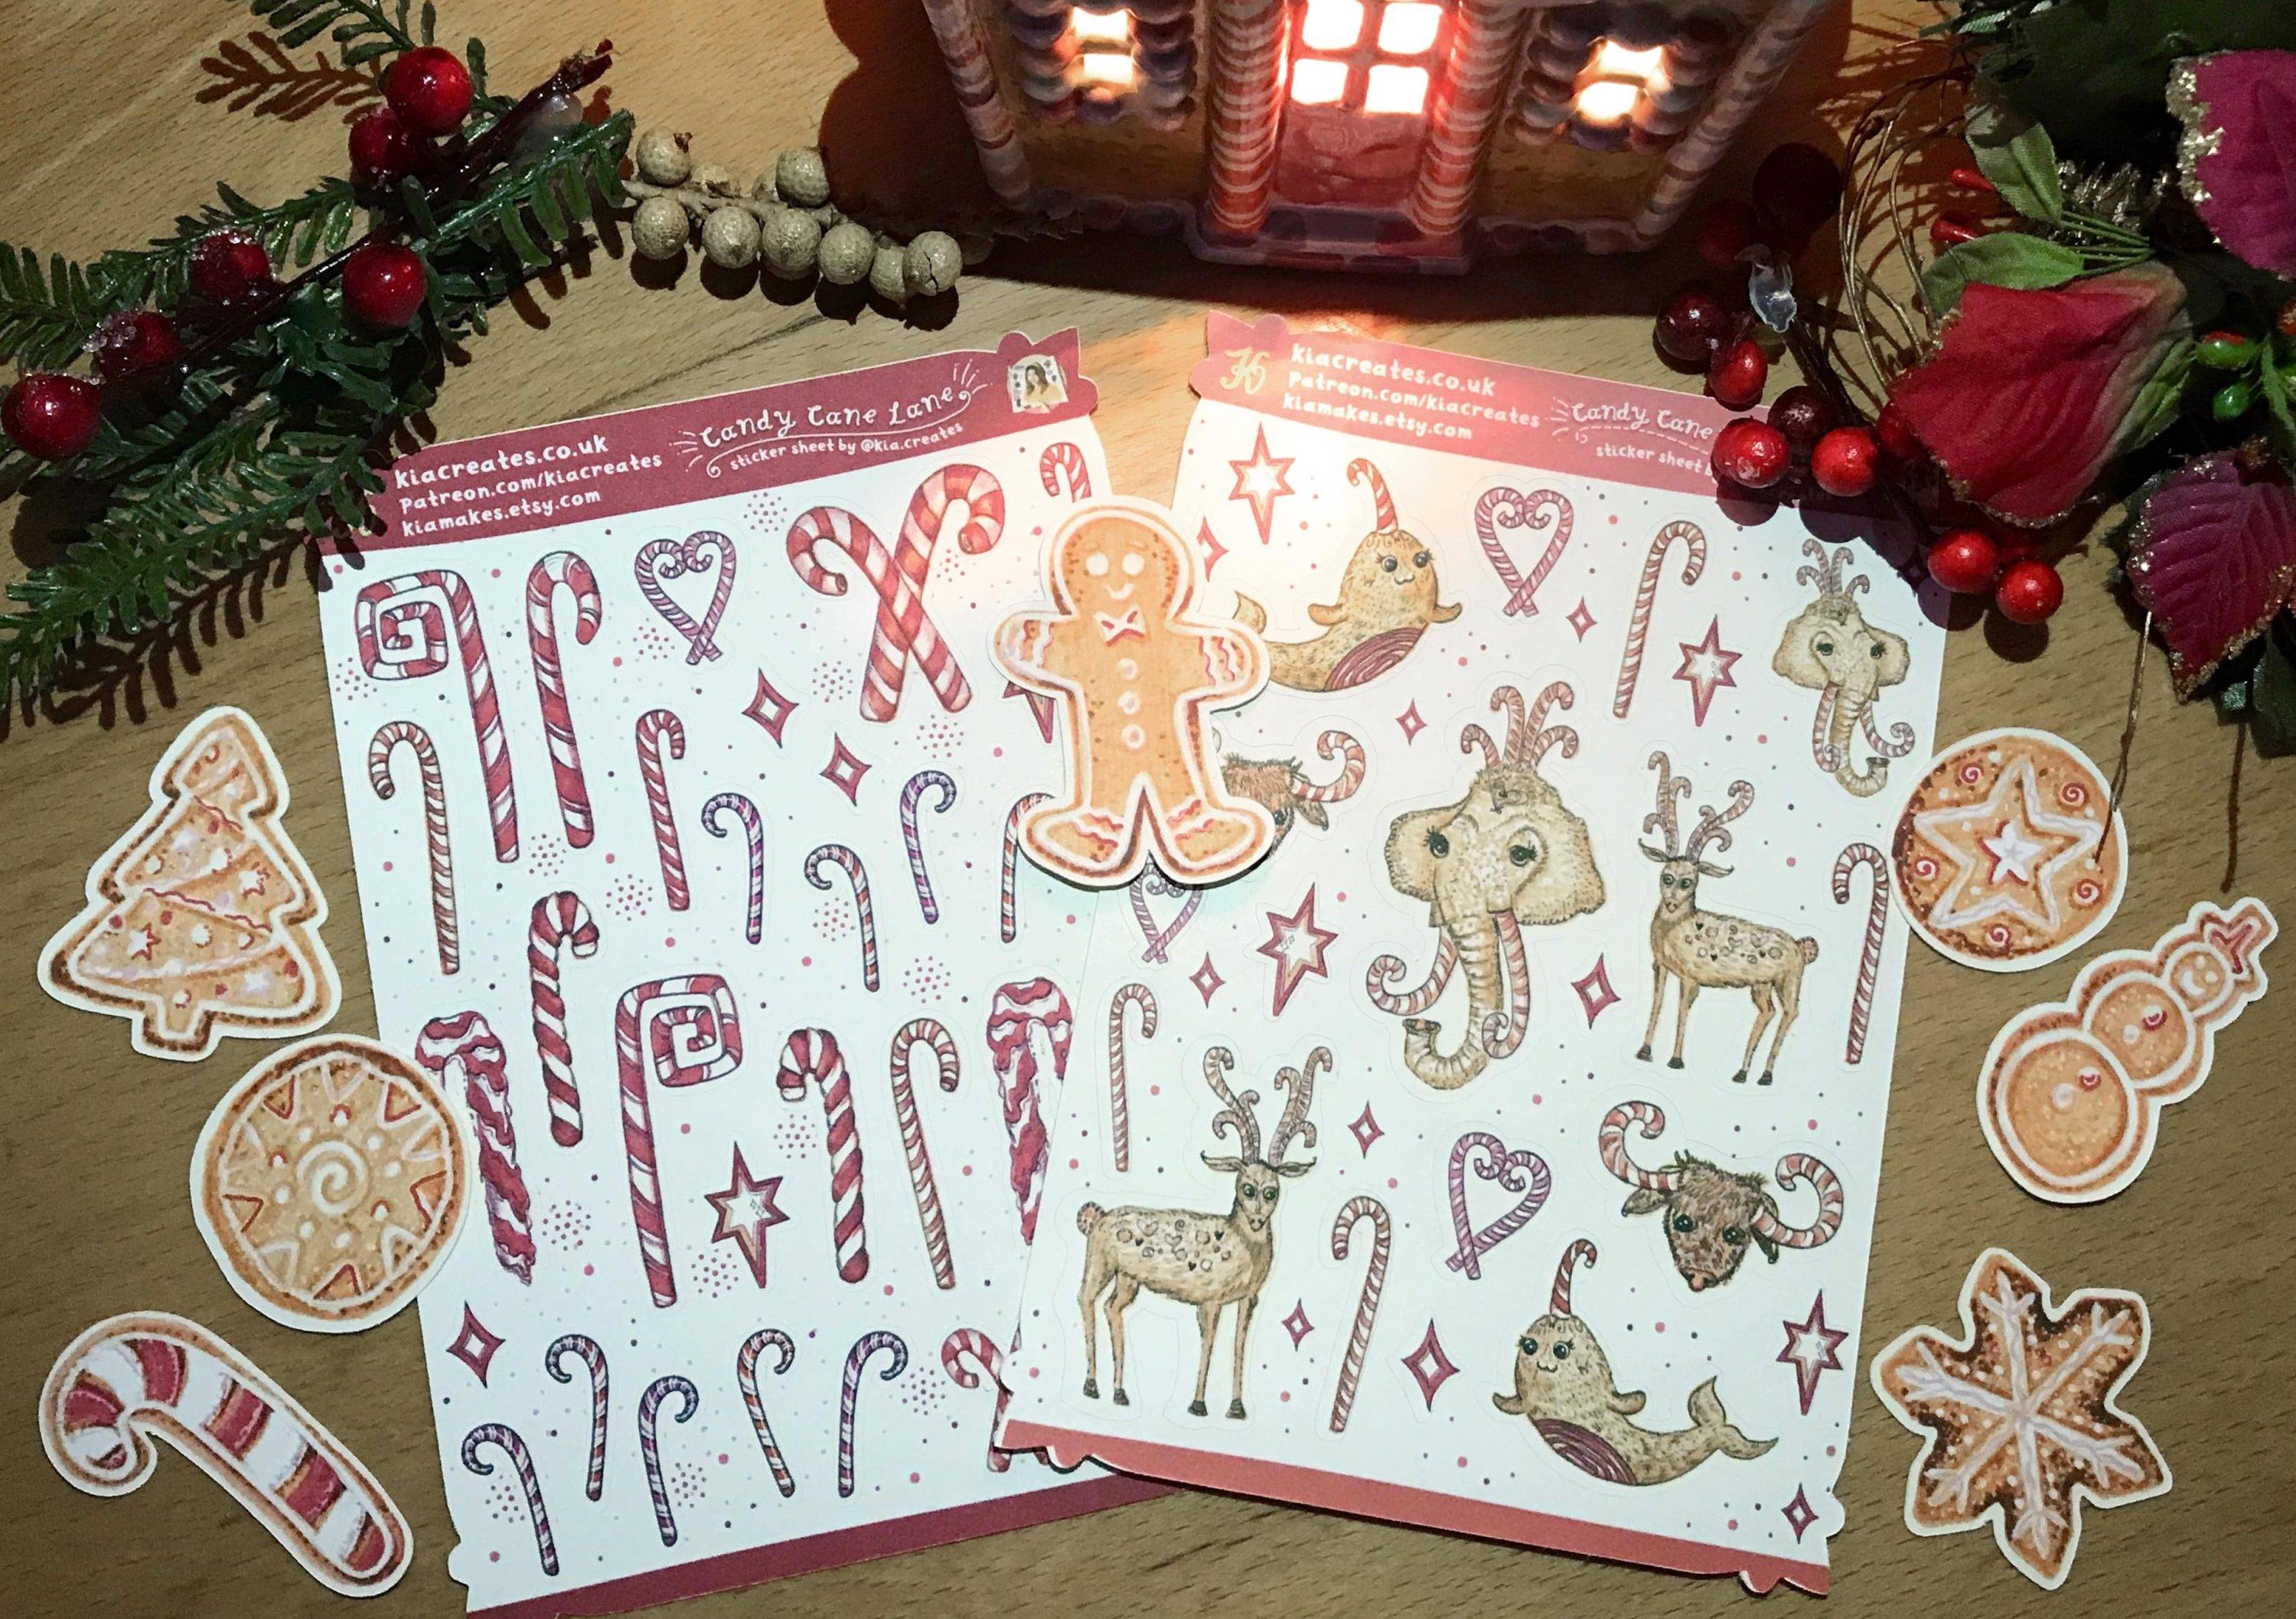 Candy Cane Creatures sticker sheet and Candy Cane Lane sticker sheet